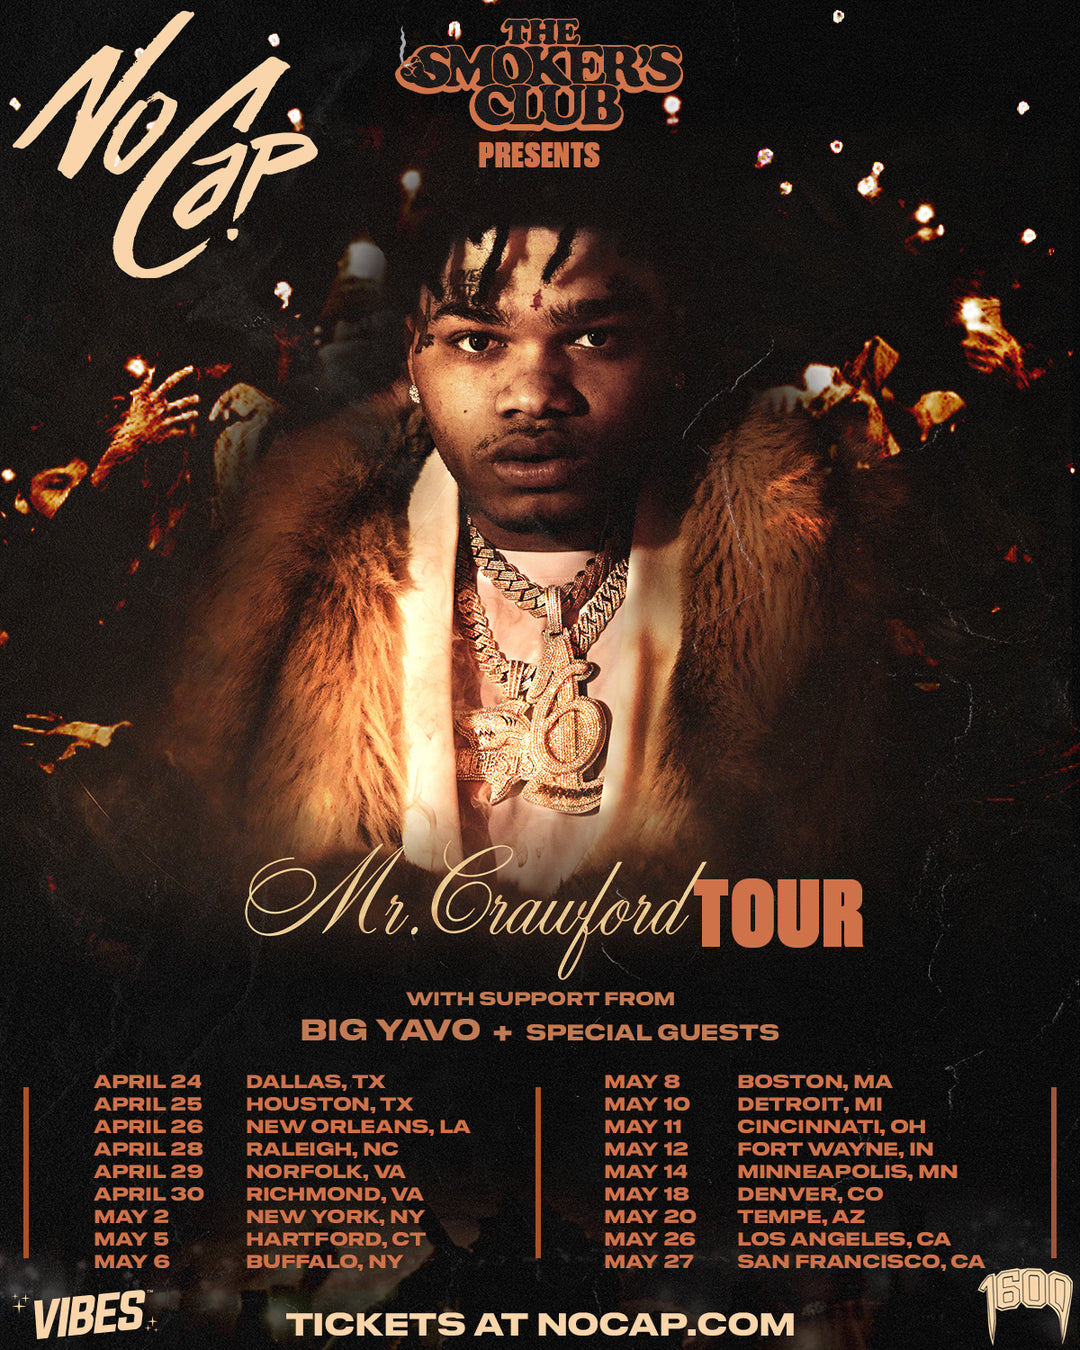 NoCap is Hitting the Road with The Smokers Club This Spring